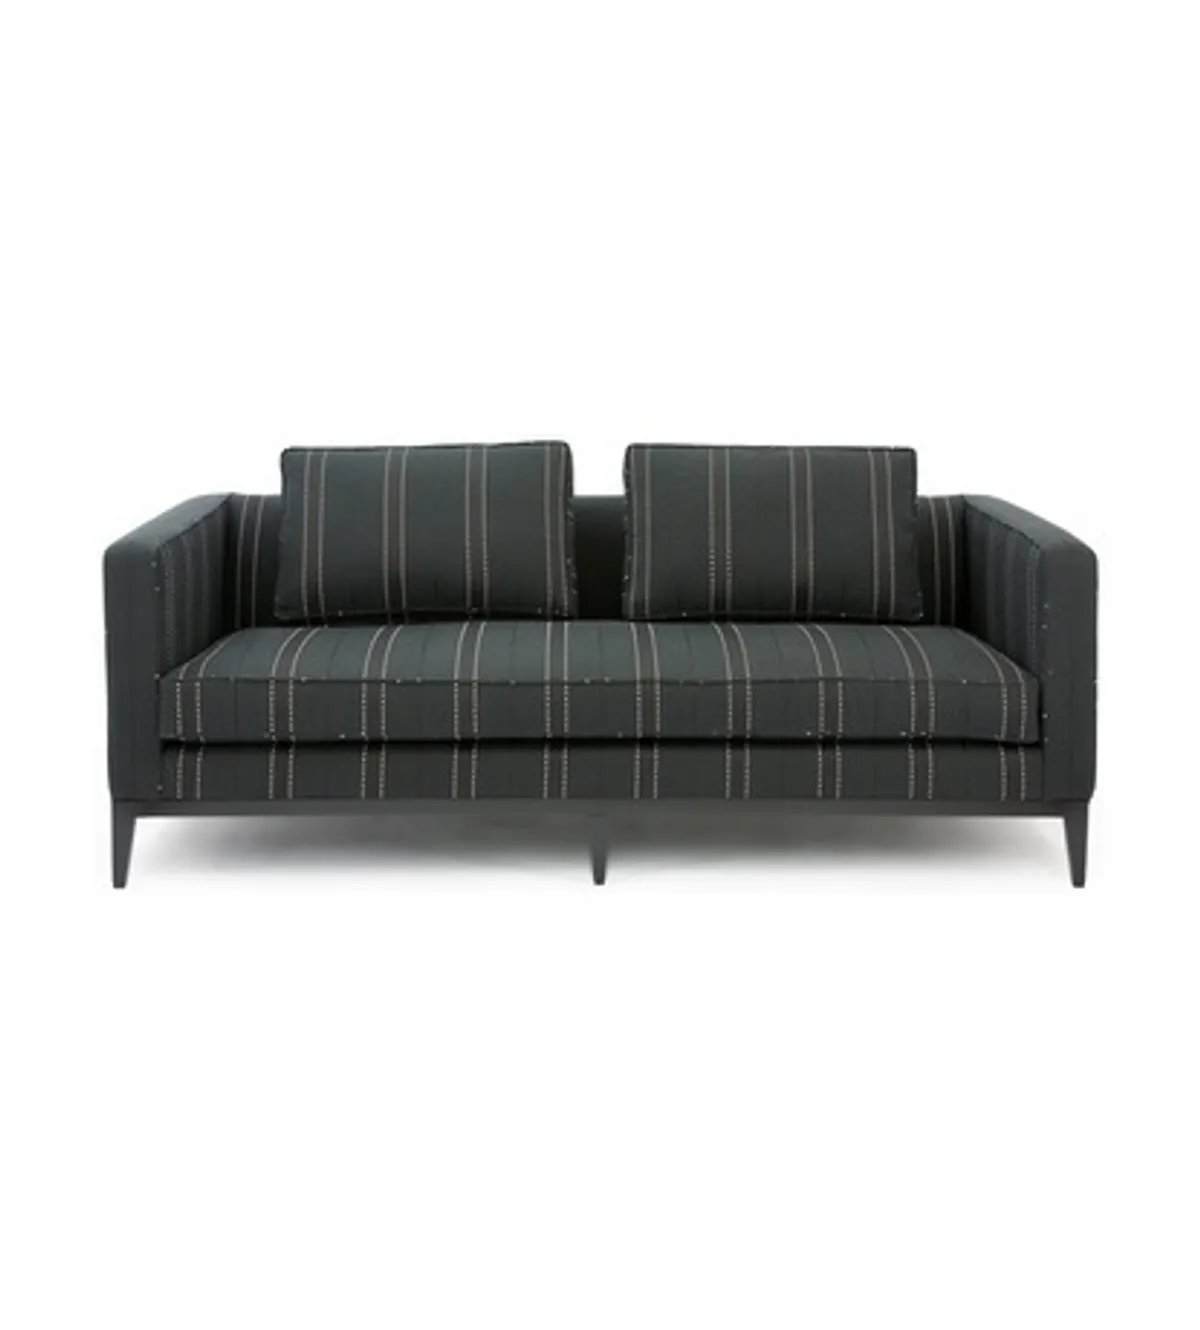 Executive Sofa By Inside Out Contracts